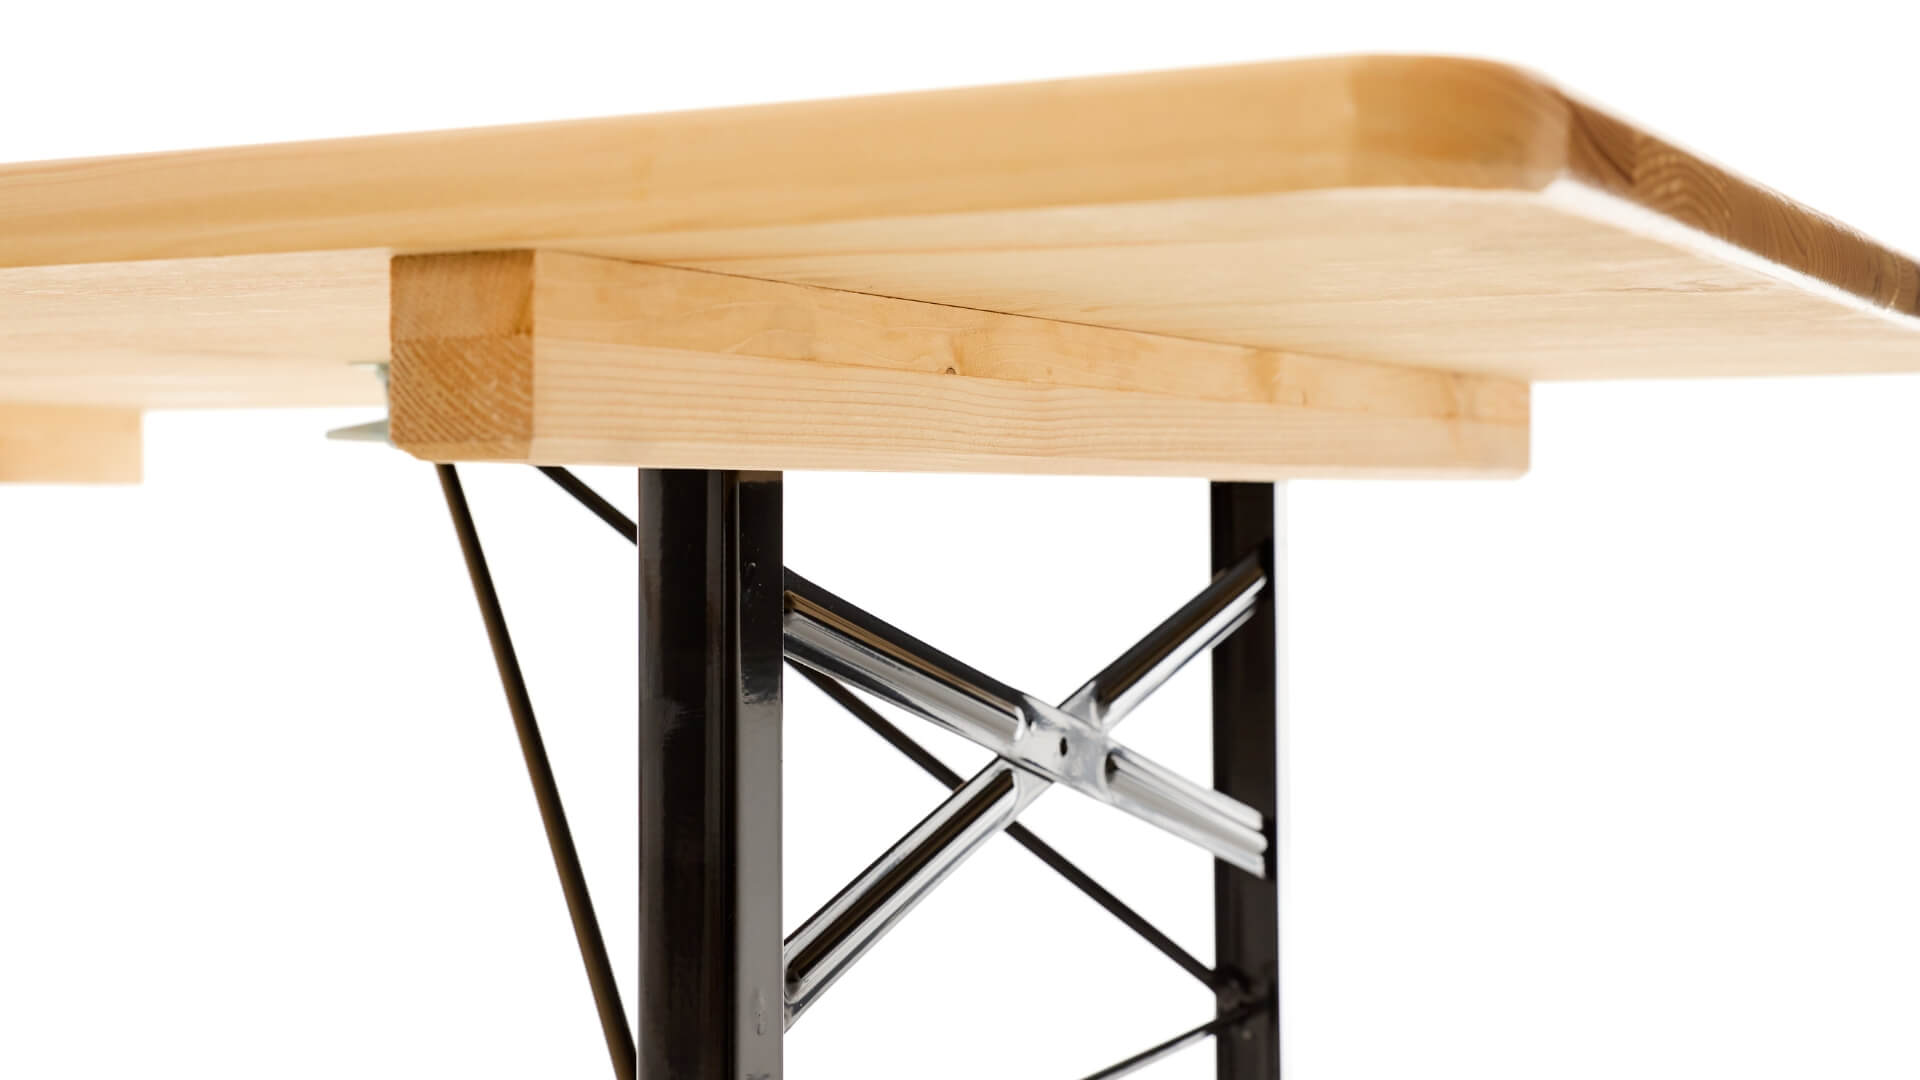 The stacking ledges of the wide beer garden table set protect the set during stacking, transportation and disassembly.